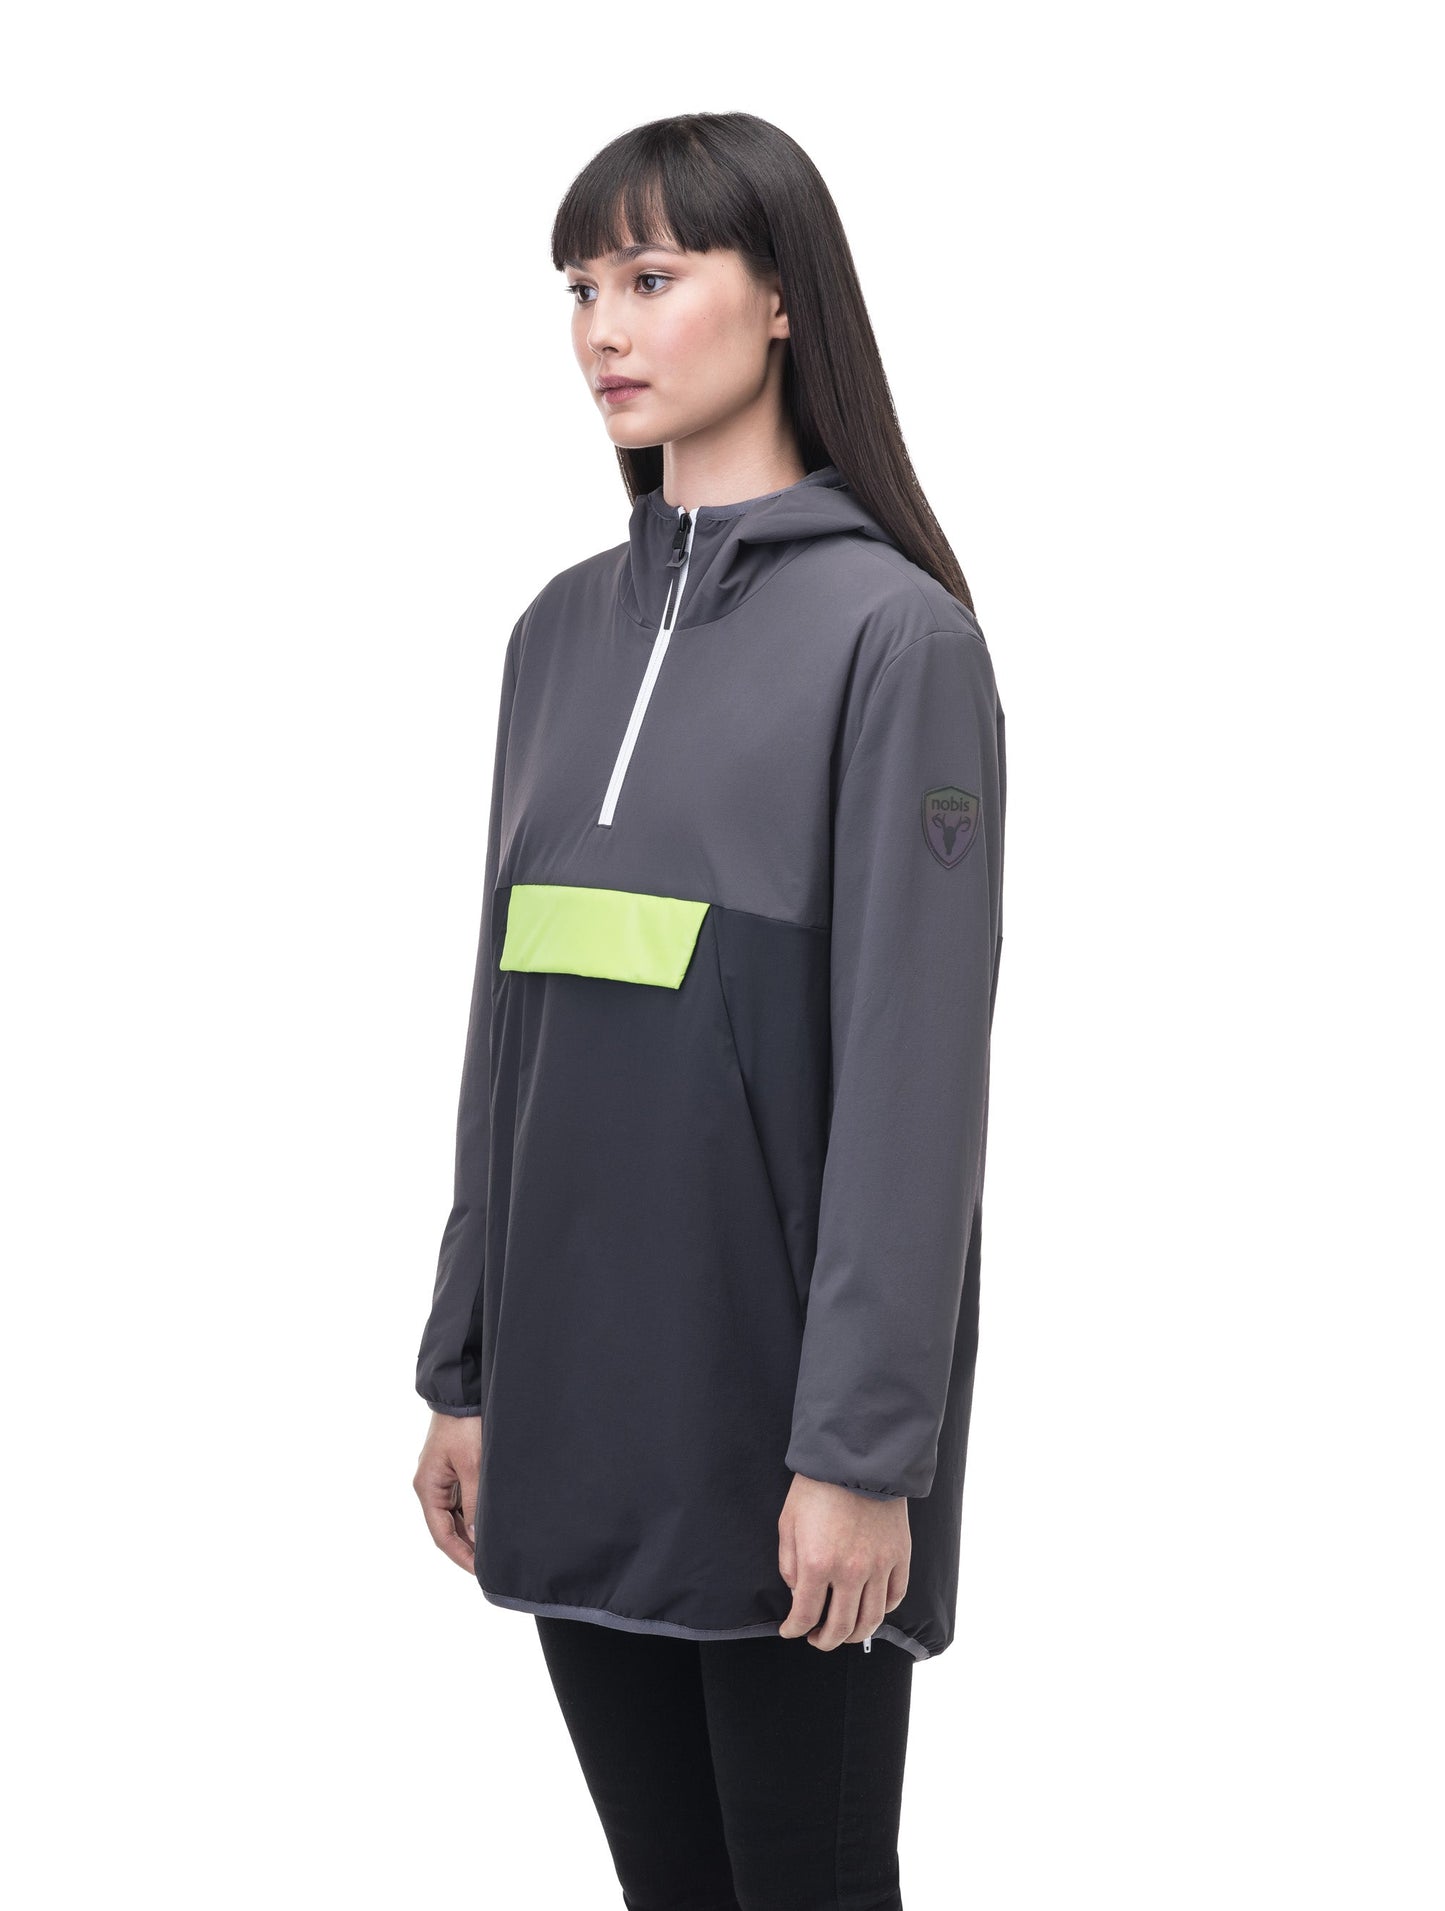 Unisex thigh length hooded anorak with vertical zipper along collar, side zippers along torso, and centre zipper pouch with a reflective flap, in Steel Grey/Black